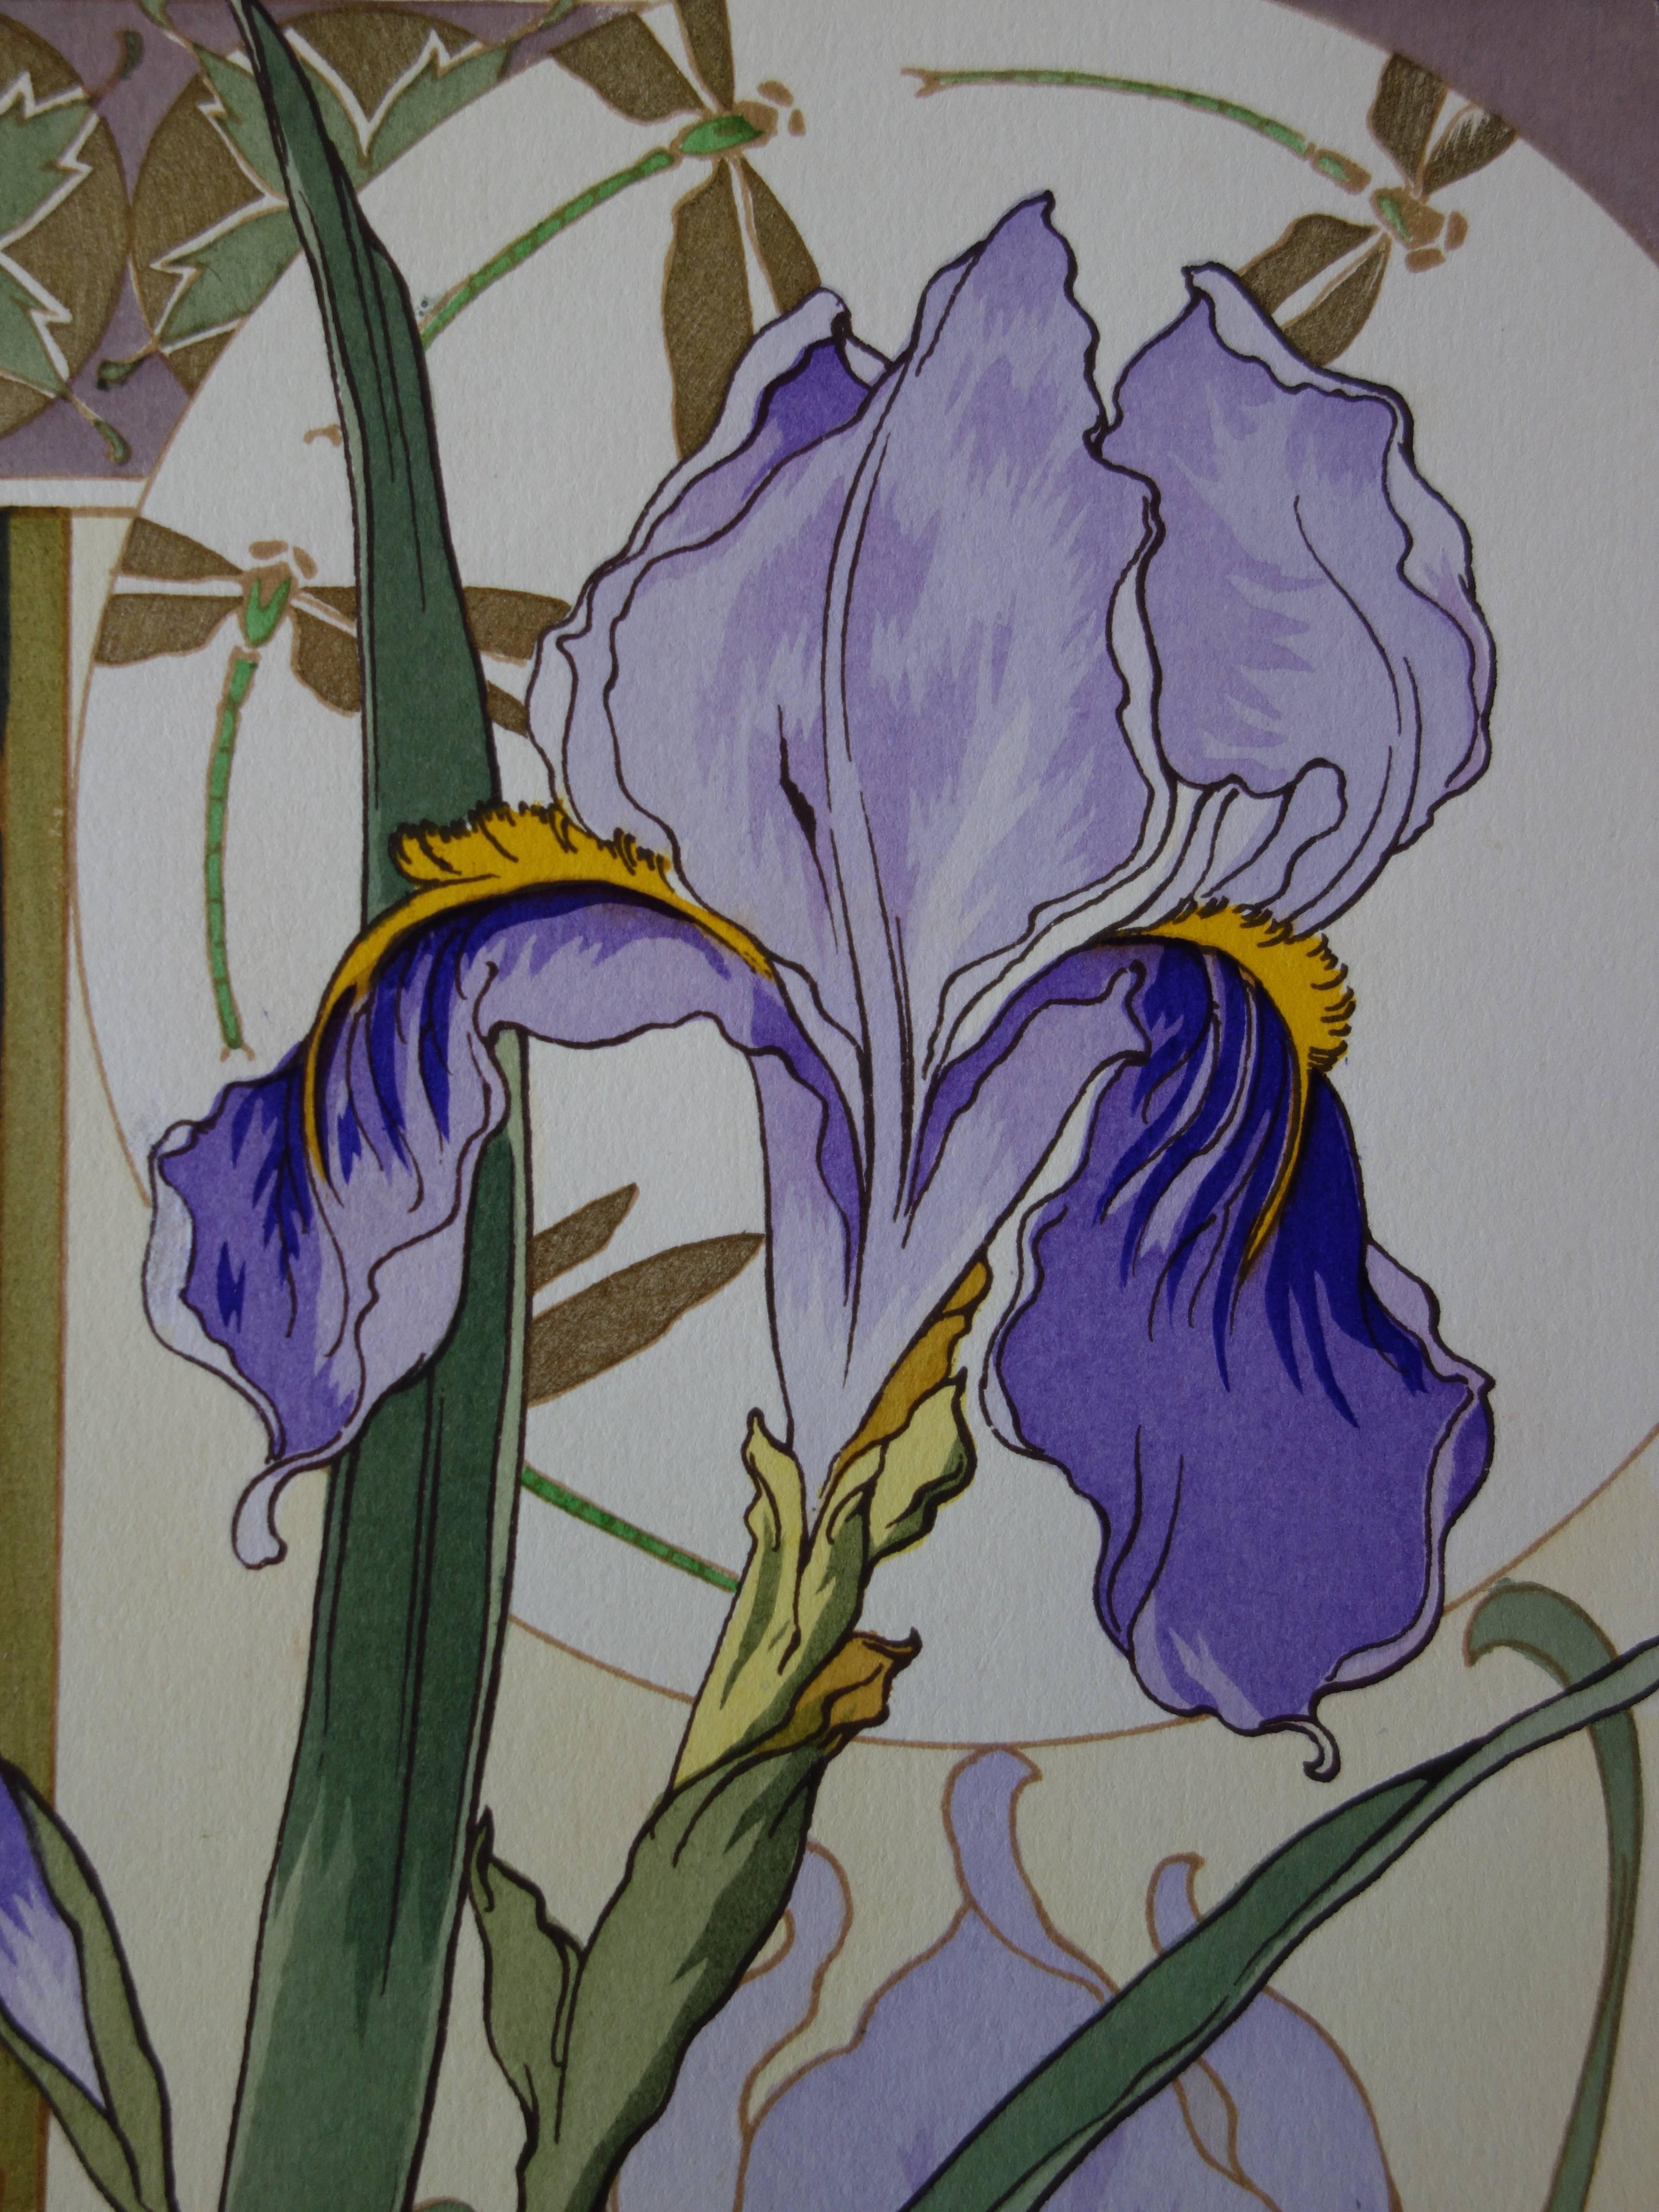 C RIOM : Irises And Rosehips - Original Lithograph - Art Nouveau 1890s - Gray Interior Print by Unknown